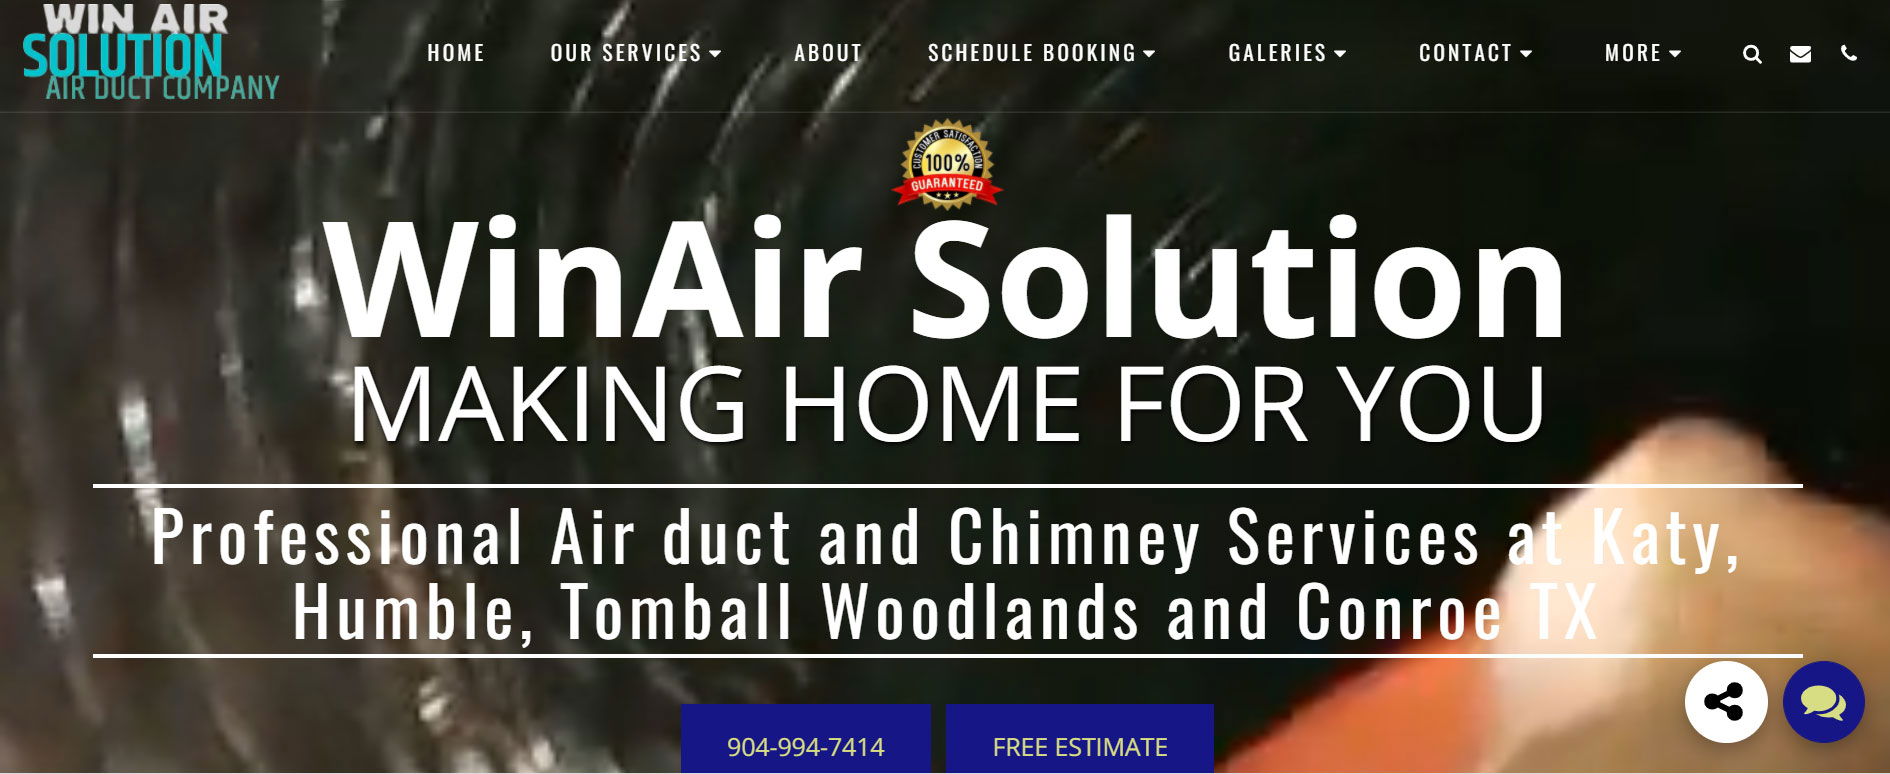 Air duct and Chimney Services at Katy